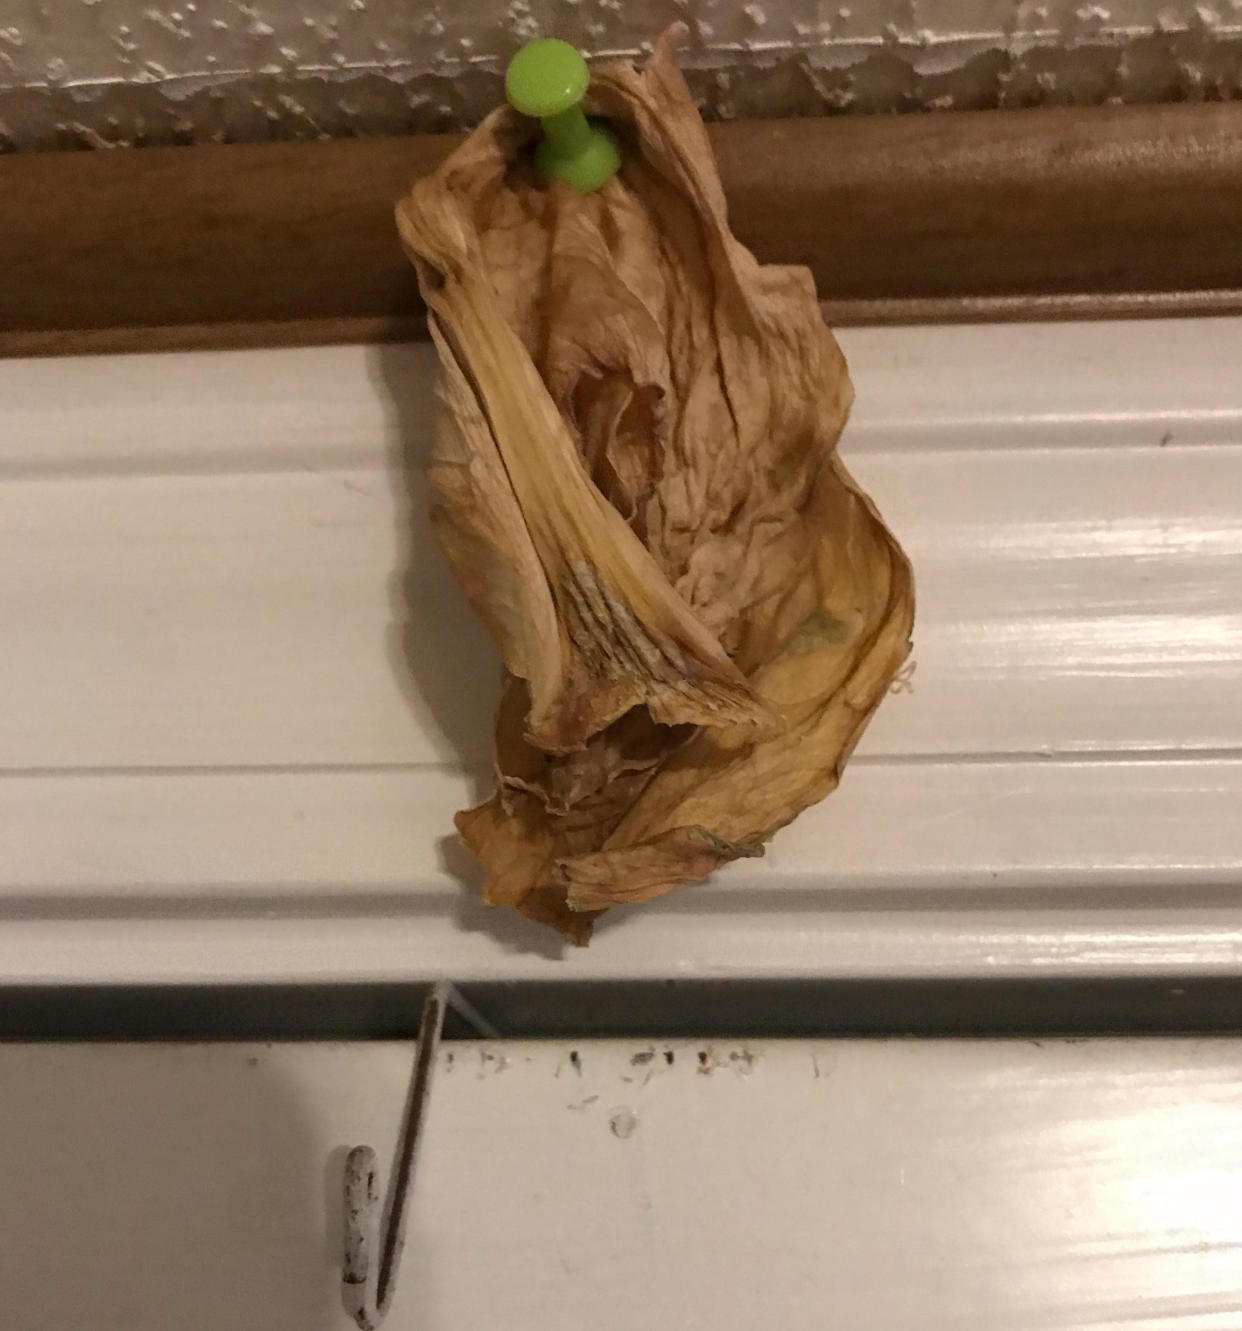 Ryan Helmlinger, who lives in St. Tammany Parish, La., says before cooking his family&#39;s traditional cabbage recipe on New Year&#39;s Day, he hangs one cabbage leaf above the kitchen door to bring good luck throughout the year. (Photo: Ryan Helmlinger)